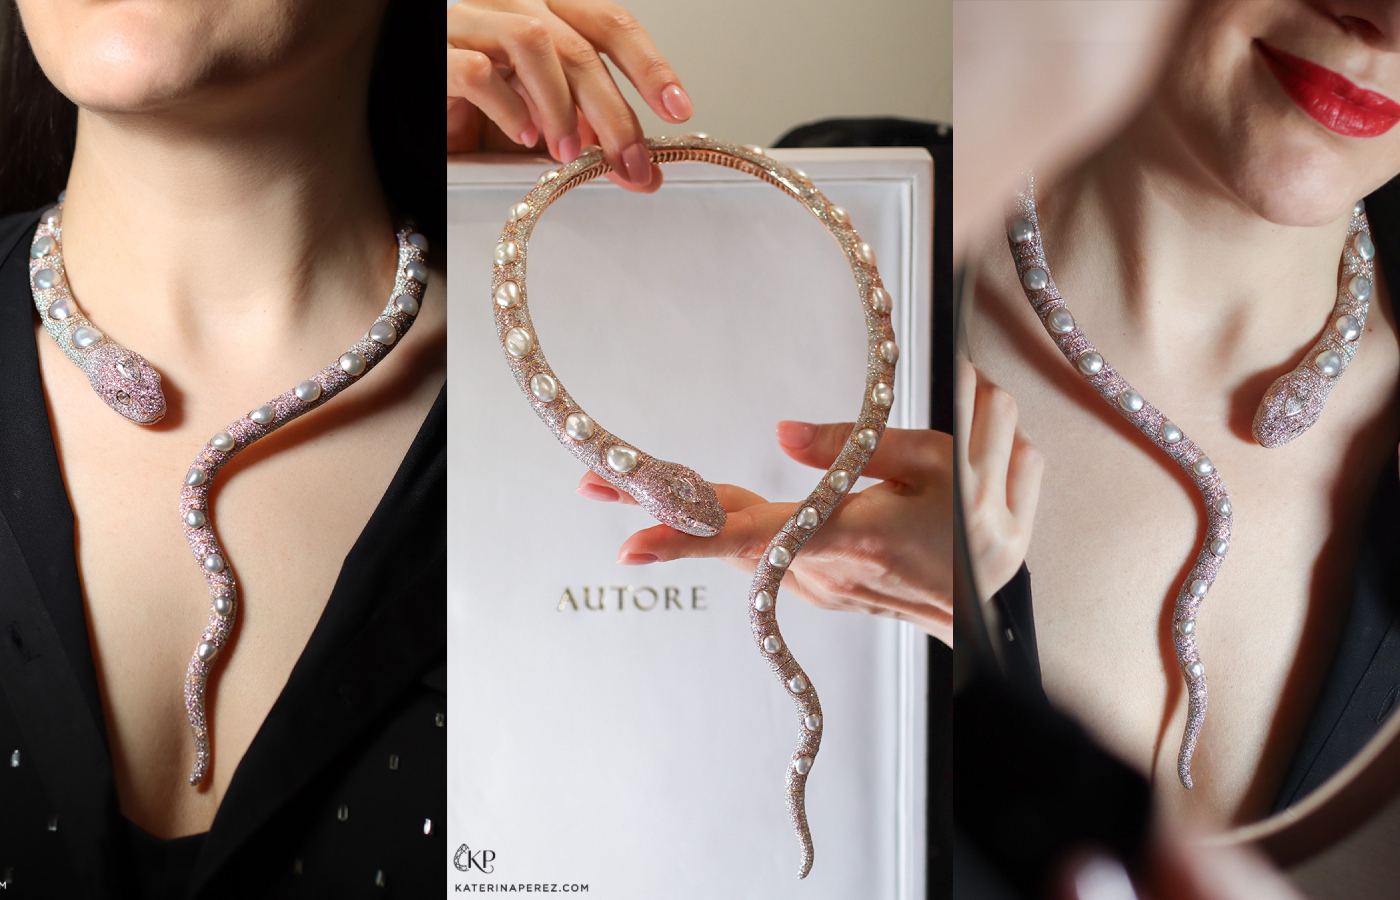 The Autore Enchantress necklace in 18k rose gold with 16.64 carats of pink diamonds, 23.99 carats of white diamonds, a 2-carat pear-shaped E colour, VVS clarity white diamond, and 26 A-grade Autore South Sea Keshi pearls